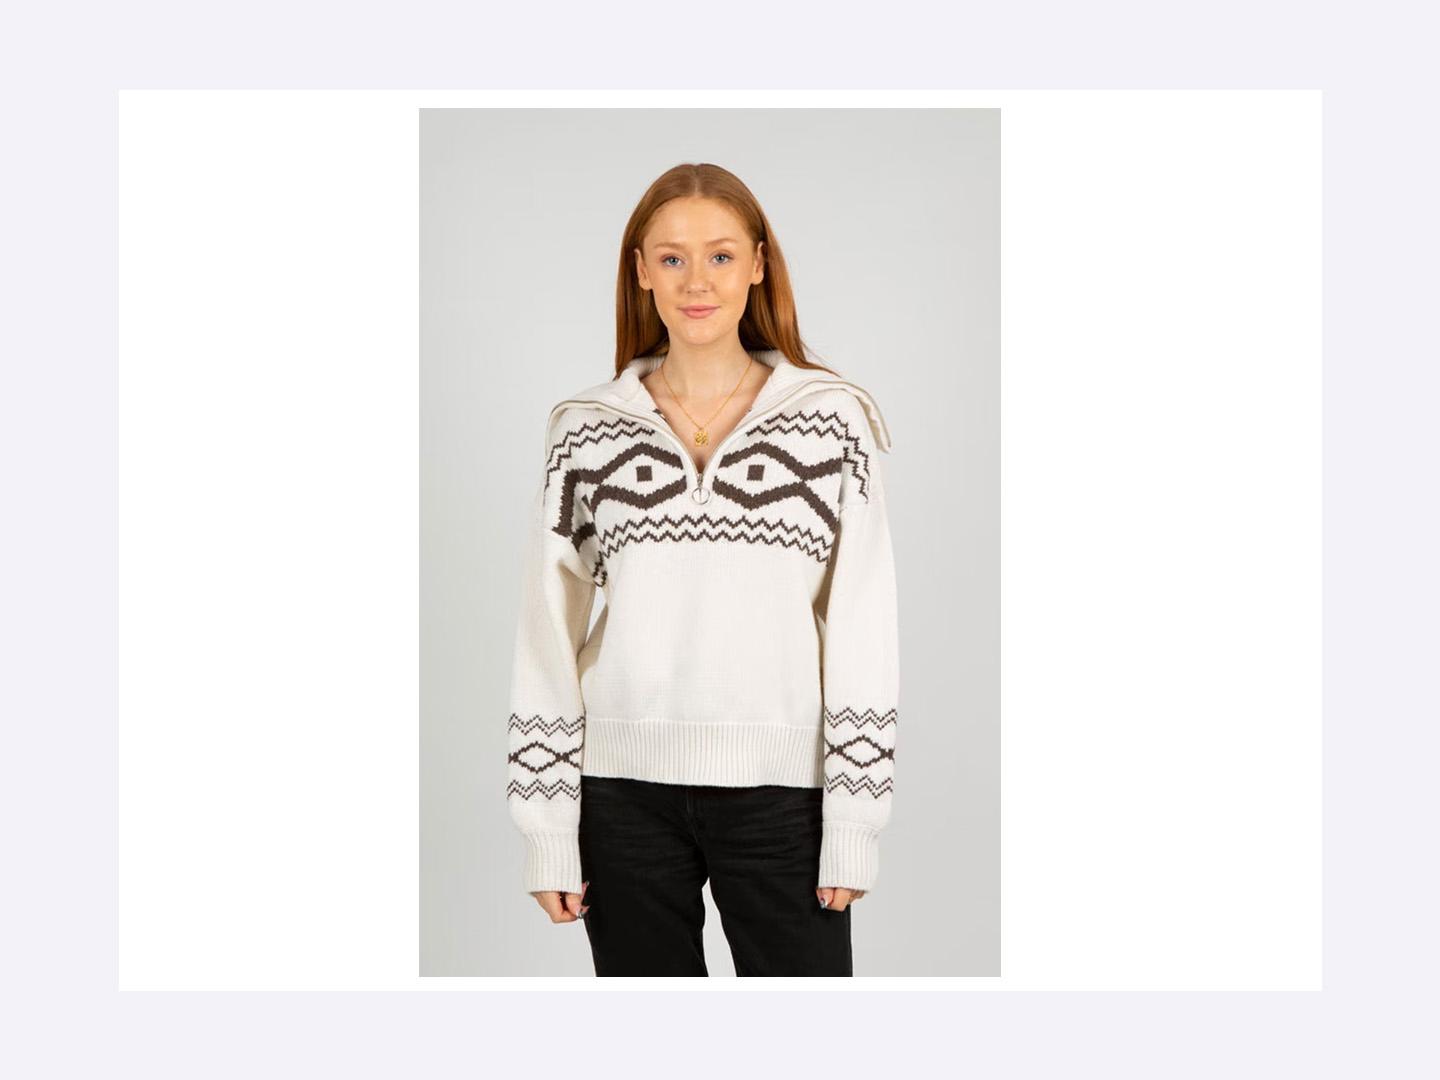 https://c.trackmytarget.com?a=jq22ra&i=w183e1&ref1=sommerstrikk&r=https%3A%2F%2Fvilloid.no%2Fproducts%2Fecho-sweater-ih-white